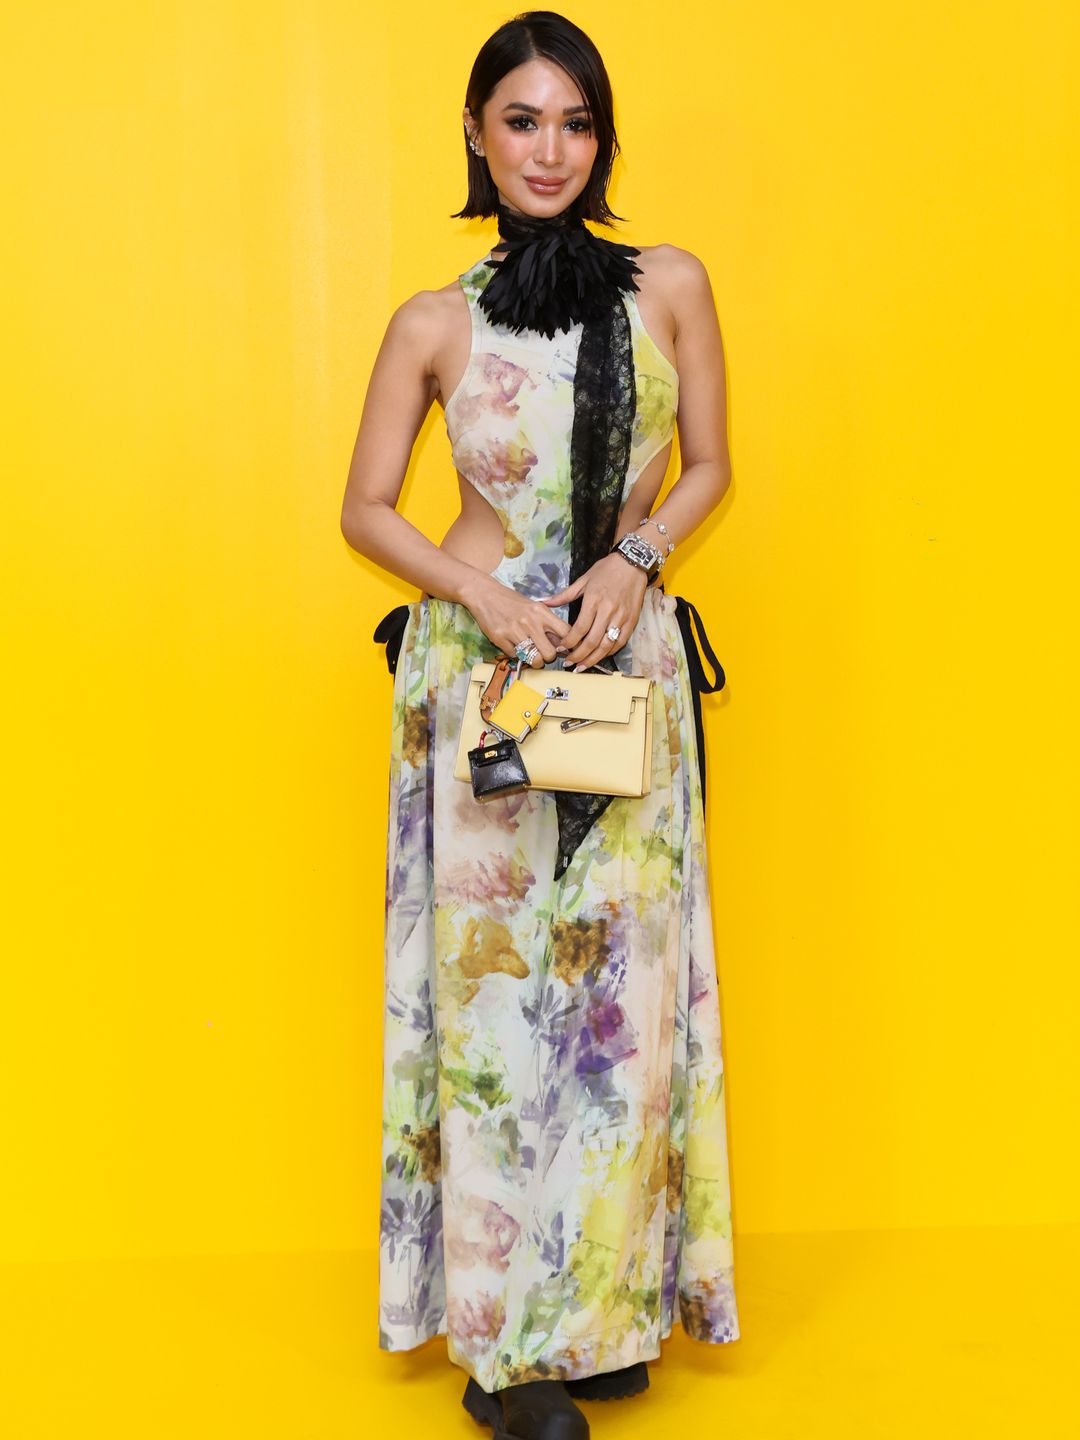 Heart Evangelista attended the  Onitsuka Tiger fashion show in a cutout floral dress with black combat boots and a frill lace collar. 